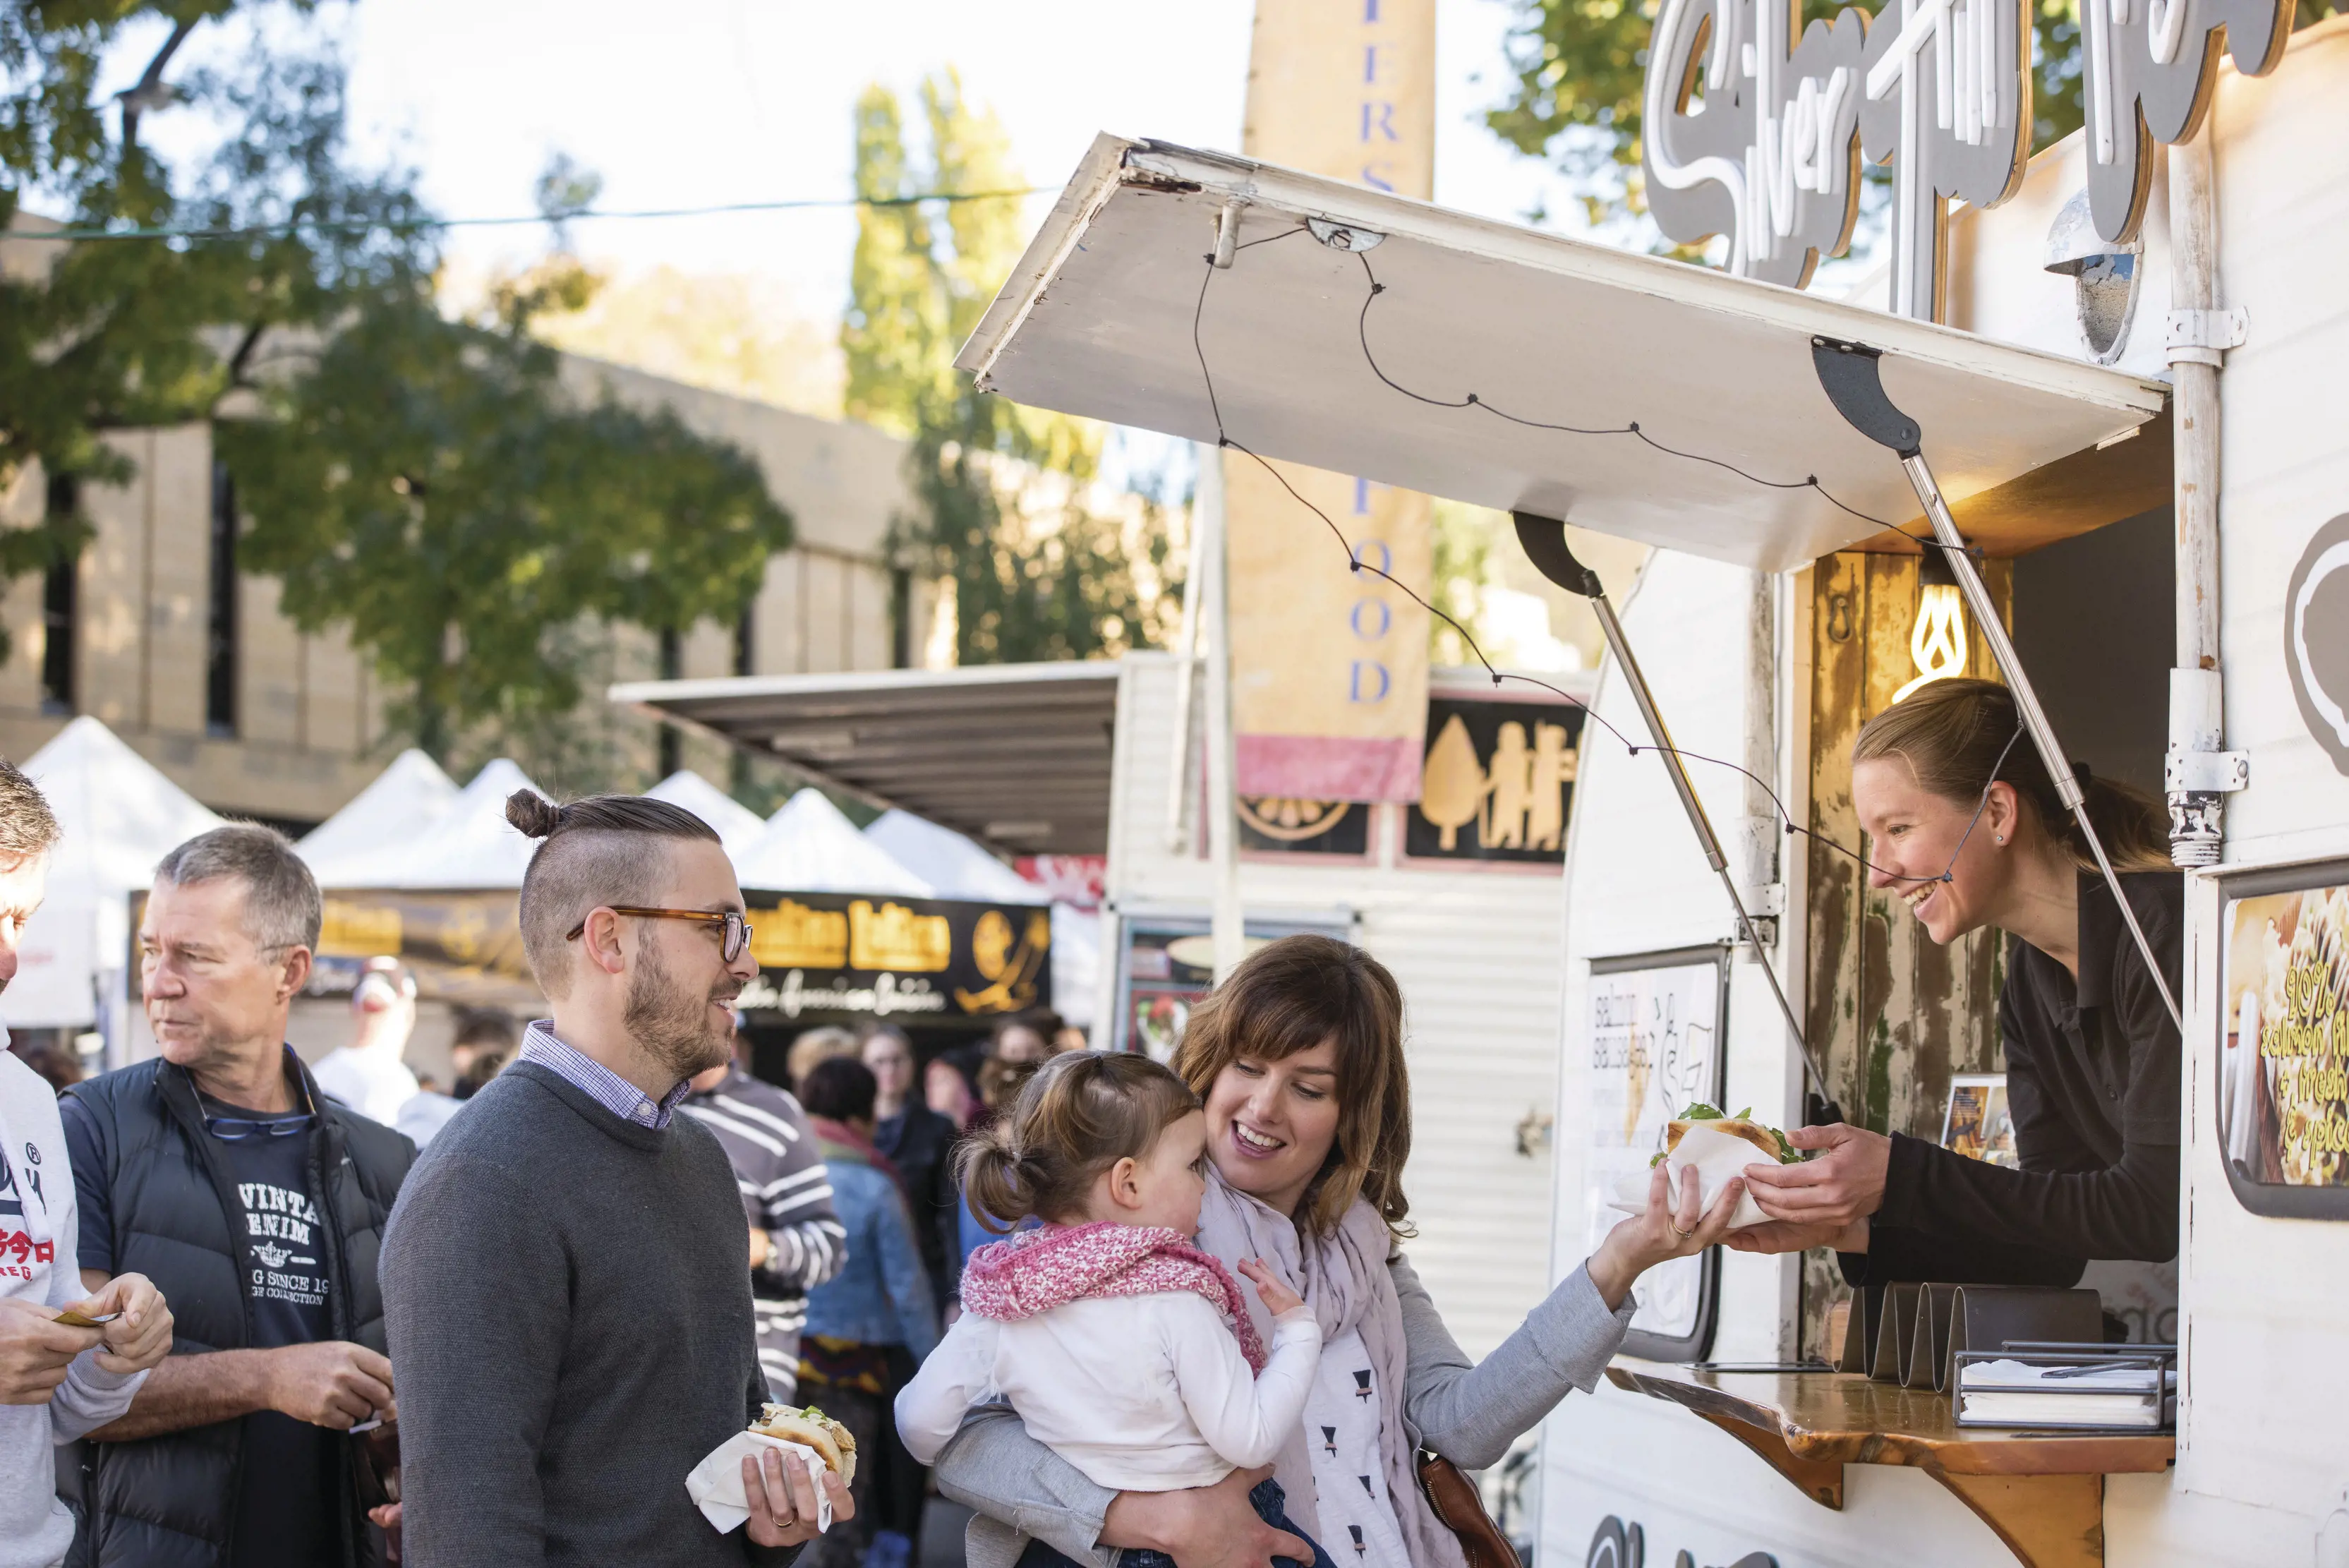 A family purchasing food at Salamanca Market. The market is set among the historic Georgian sandstone buildings of Salamanca Place in Hobart.